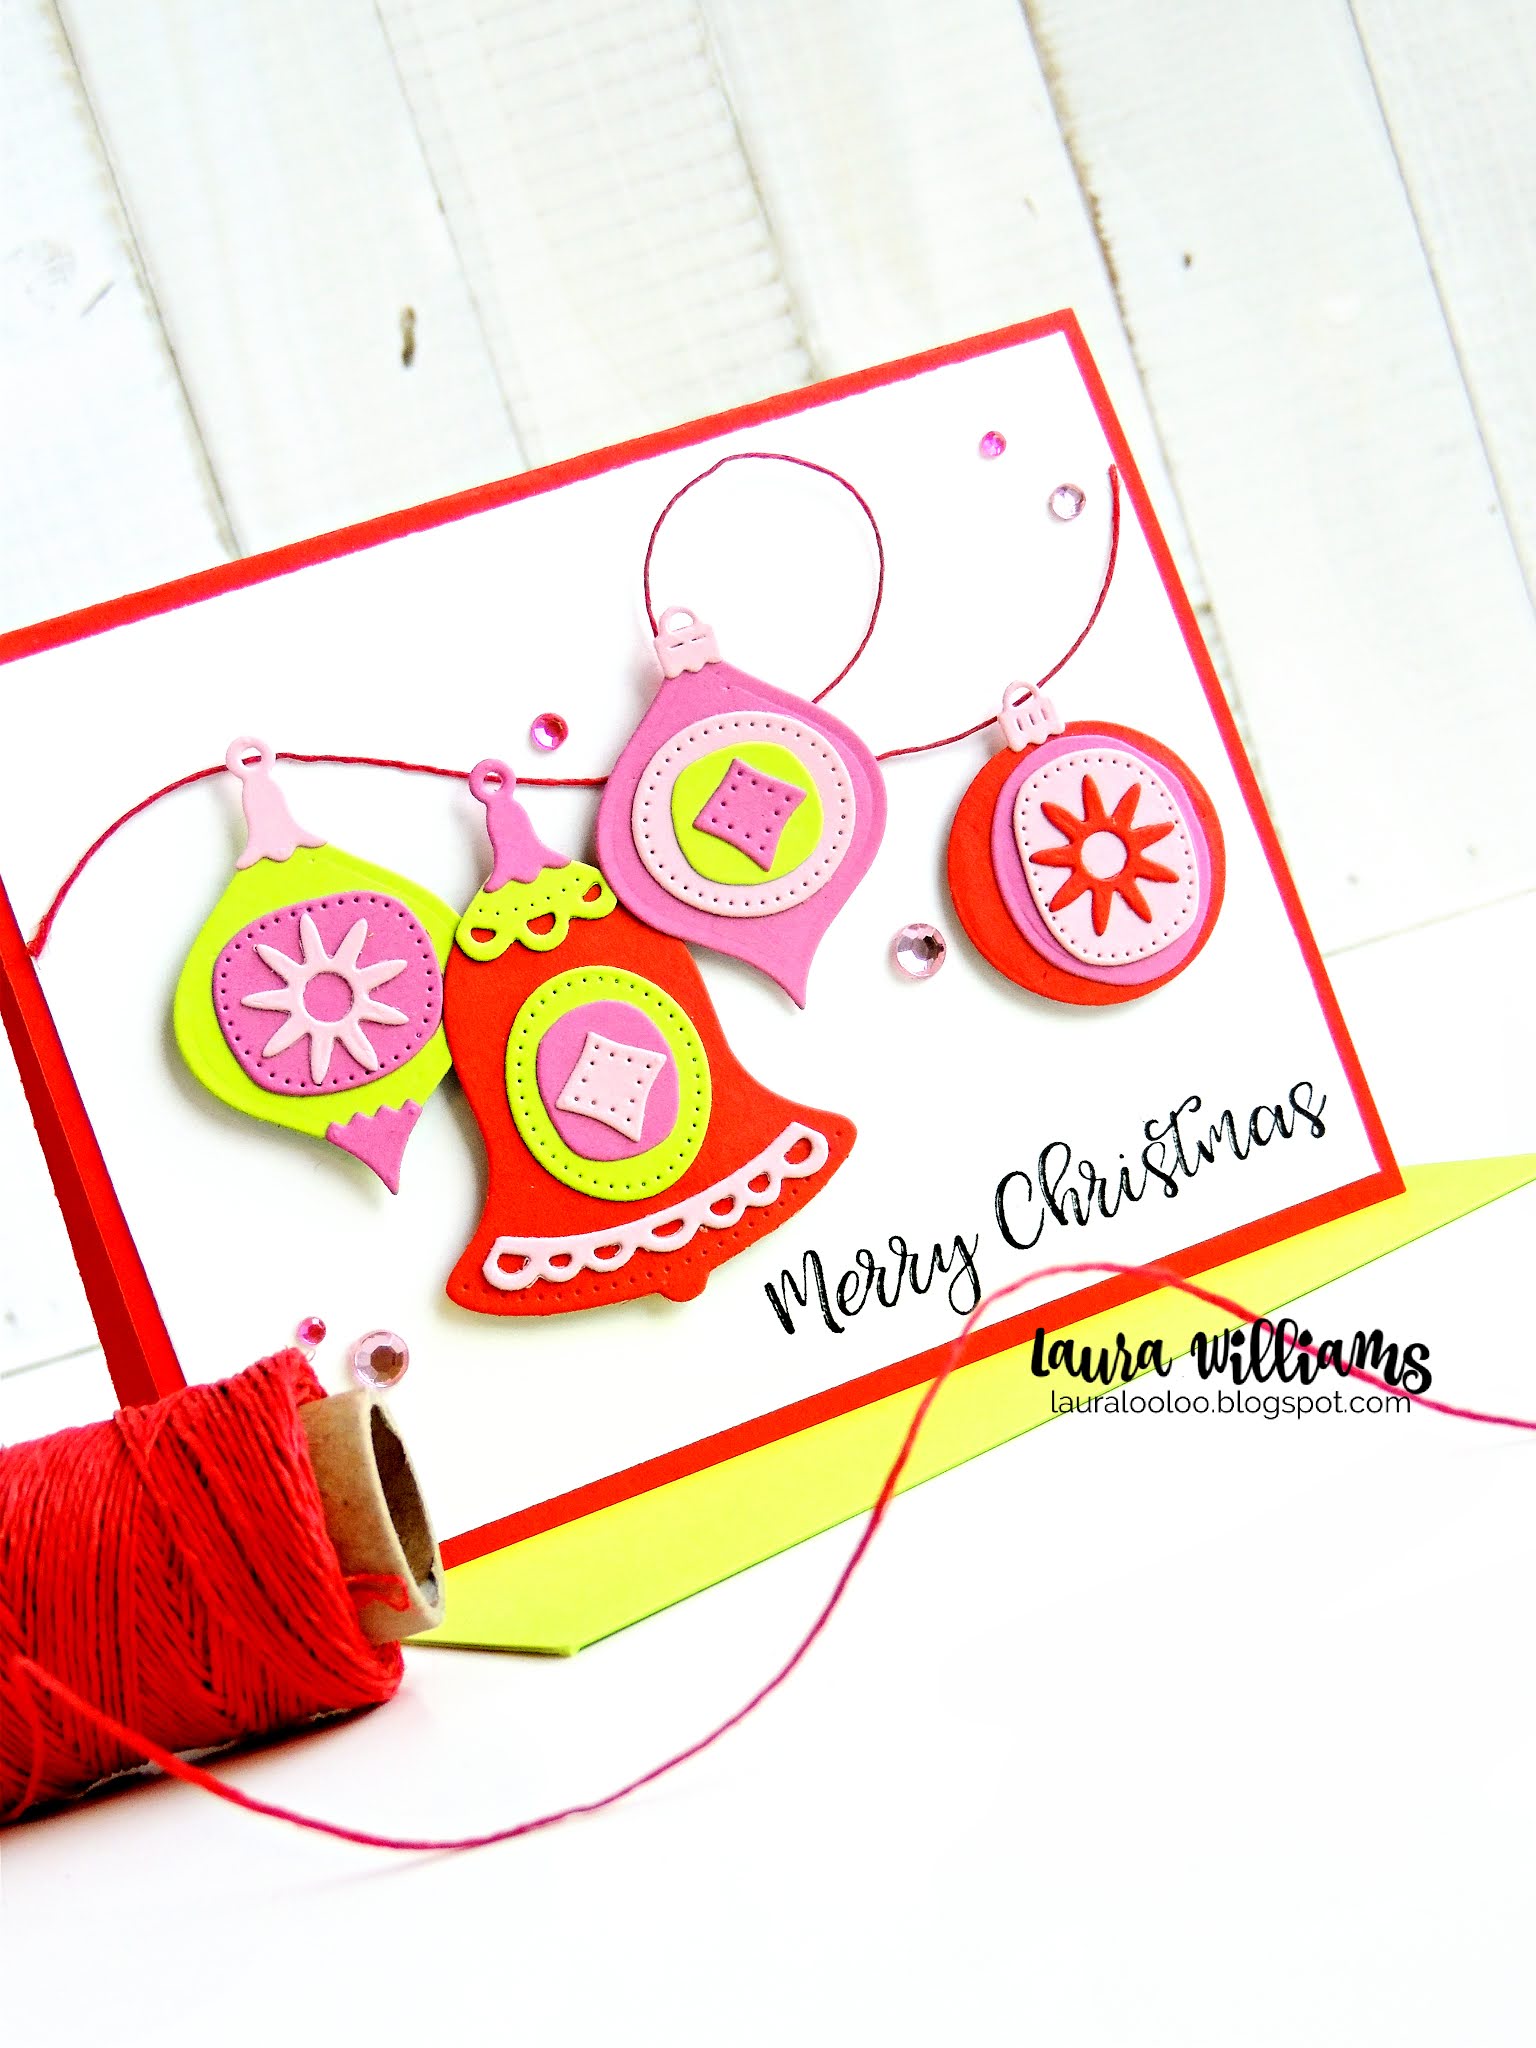 Craft your own bright and colorful retro die cut ornaments for handmade cards and crafts using dies from Impression Obsession for holiday cardmaking! Click for all the details to assemble this fun card idea.